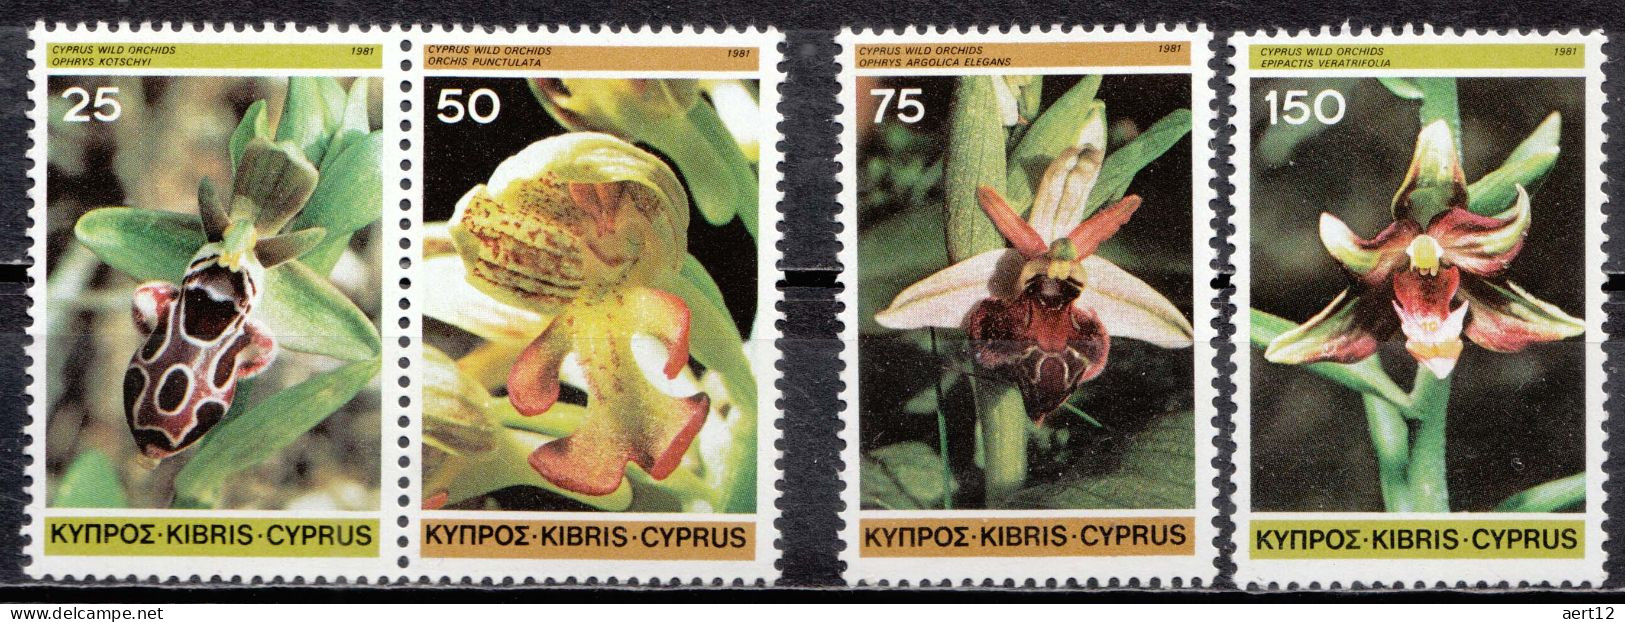 1981, Cyprus, Wild Orchids, Flowers, Orchids, Plants, 4 Stamps, MNH(**), CY 552-55 - Unused Stamps